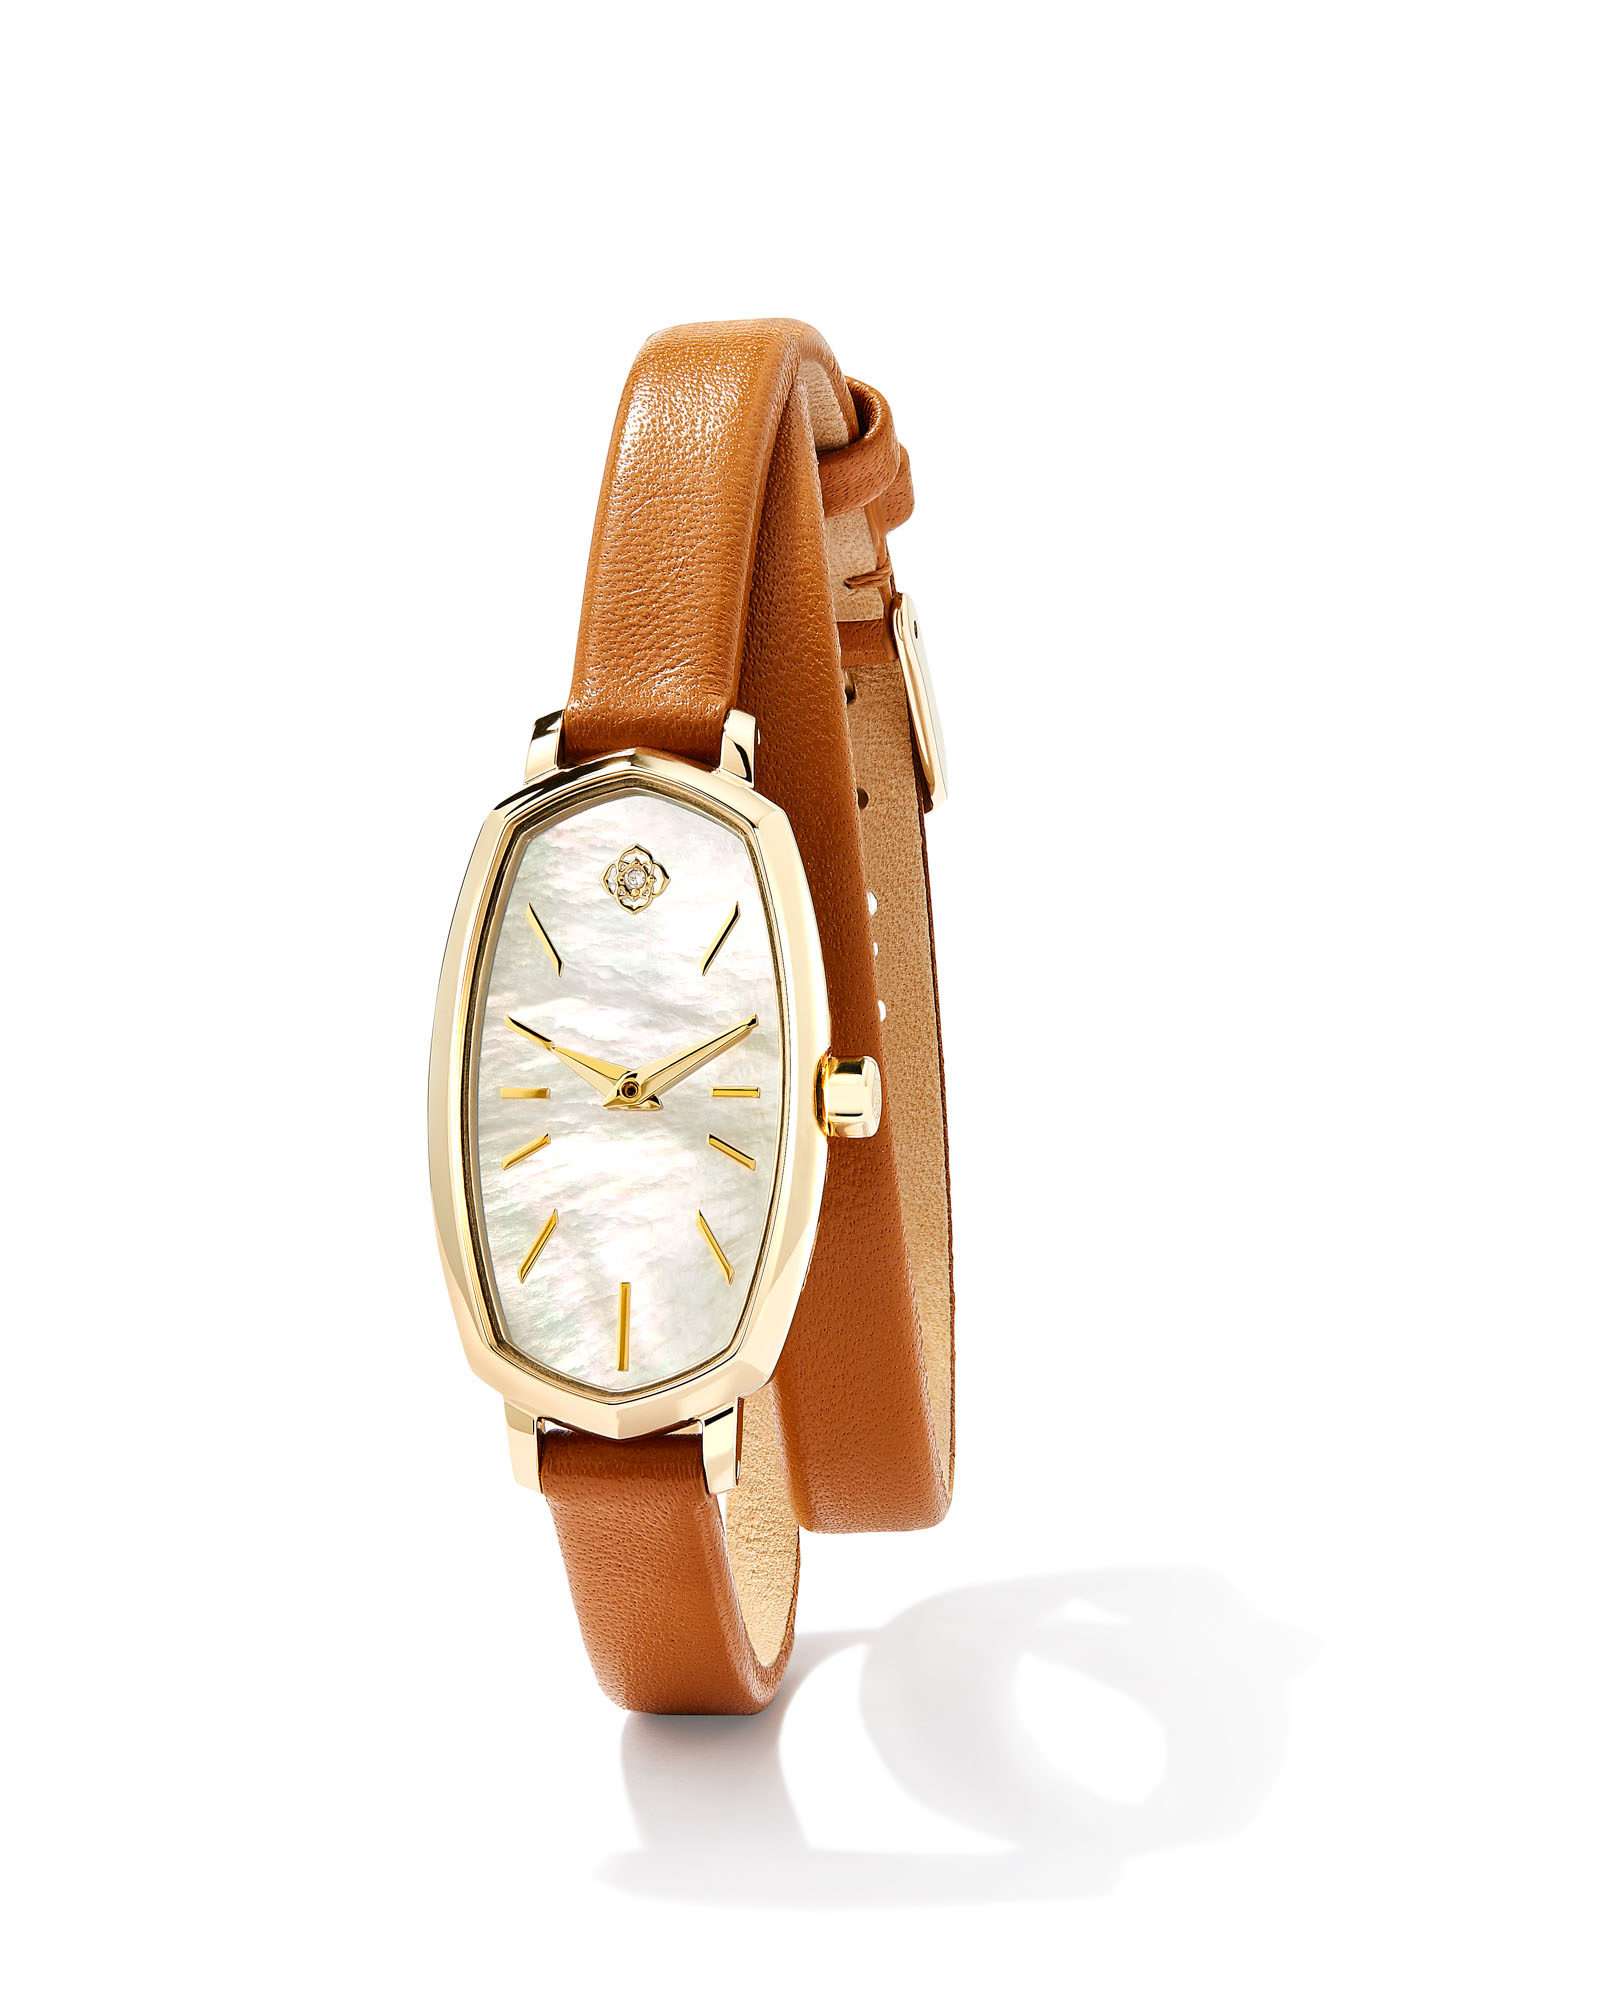 Elle Gold Tone Stainless Steel Leather Wrap Watch in Ivory Mother